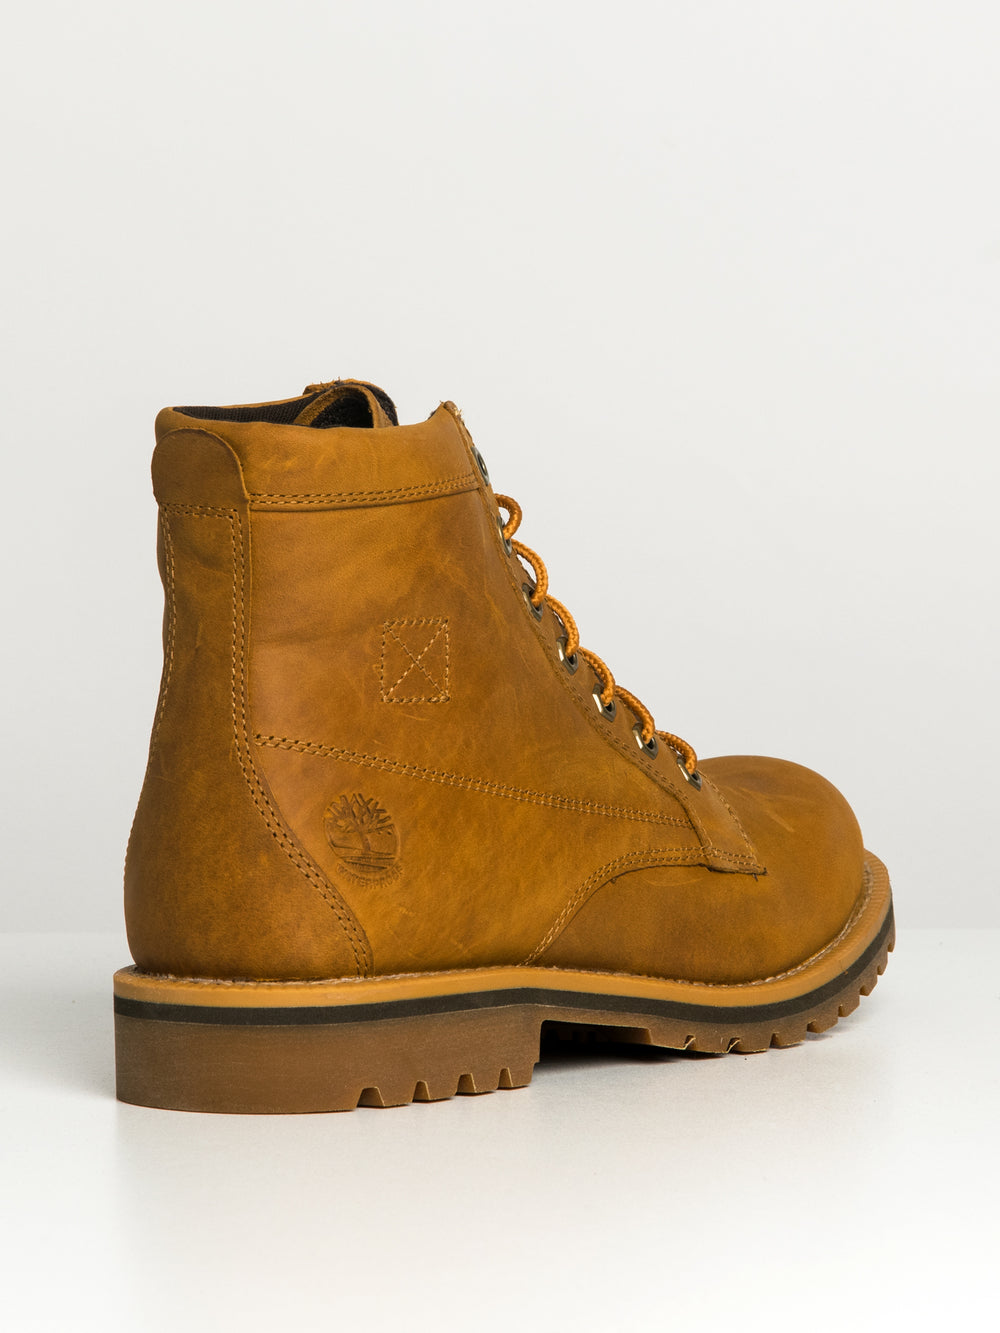 MENS TIMBERLAND REDWOOD FALLS WATER PROOF BOOT - CLEARANCE